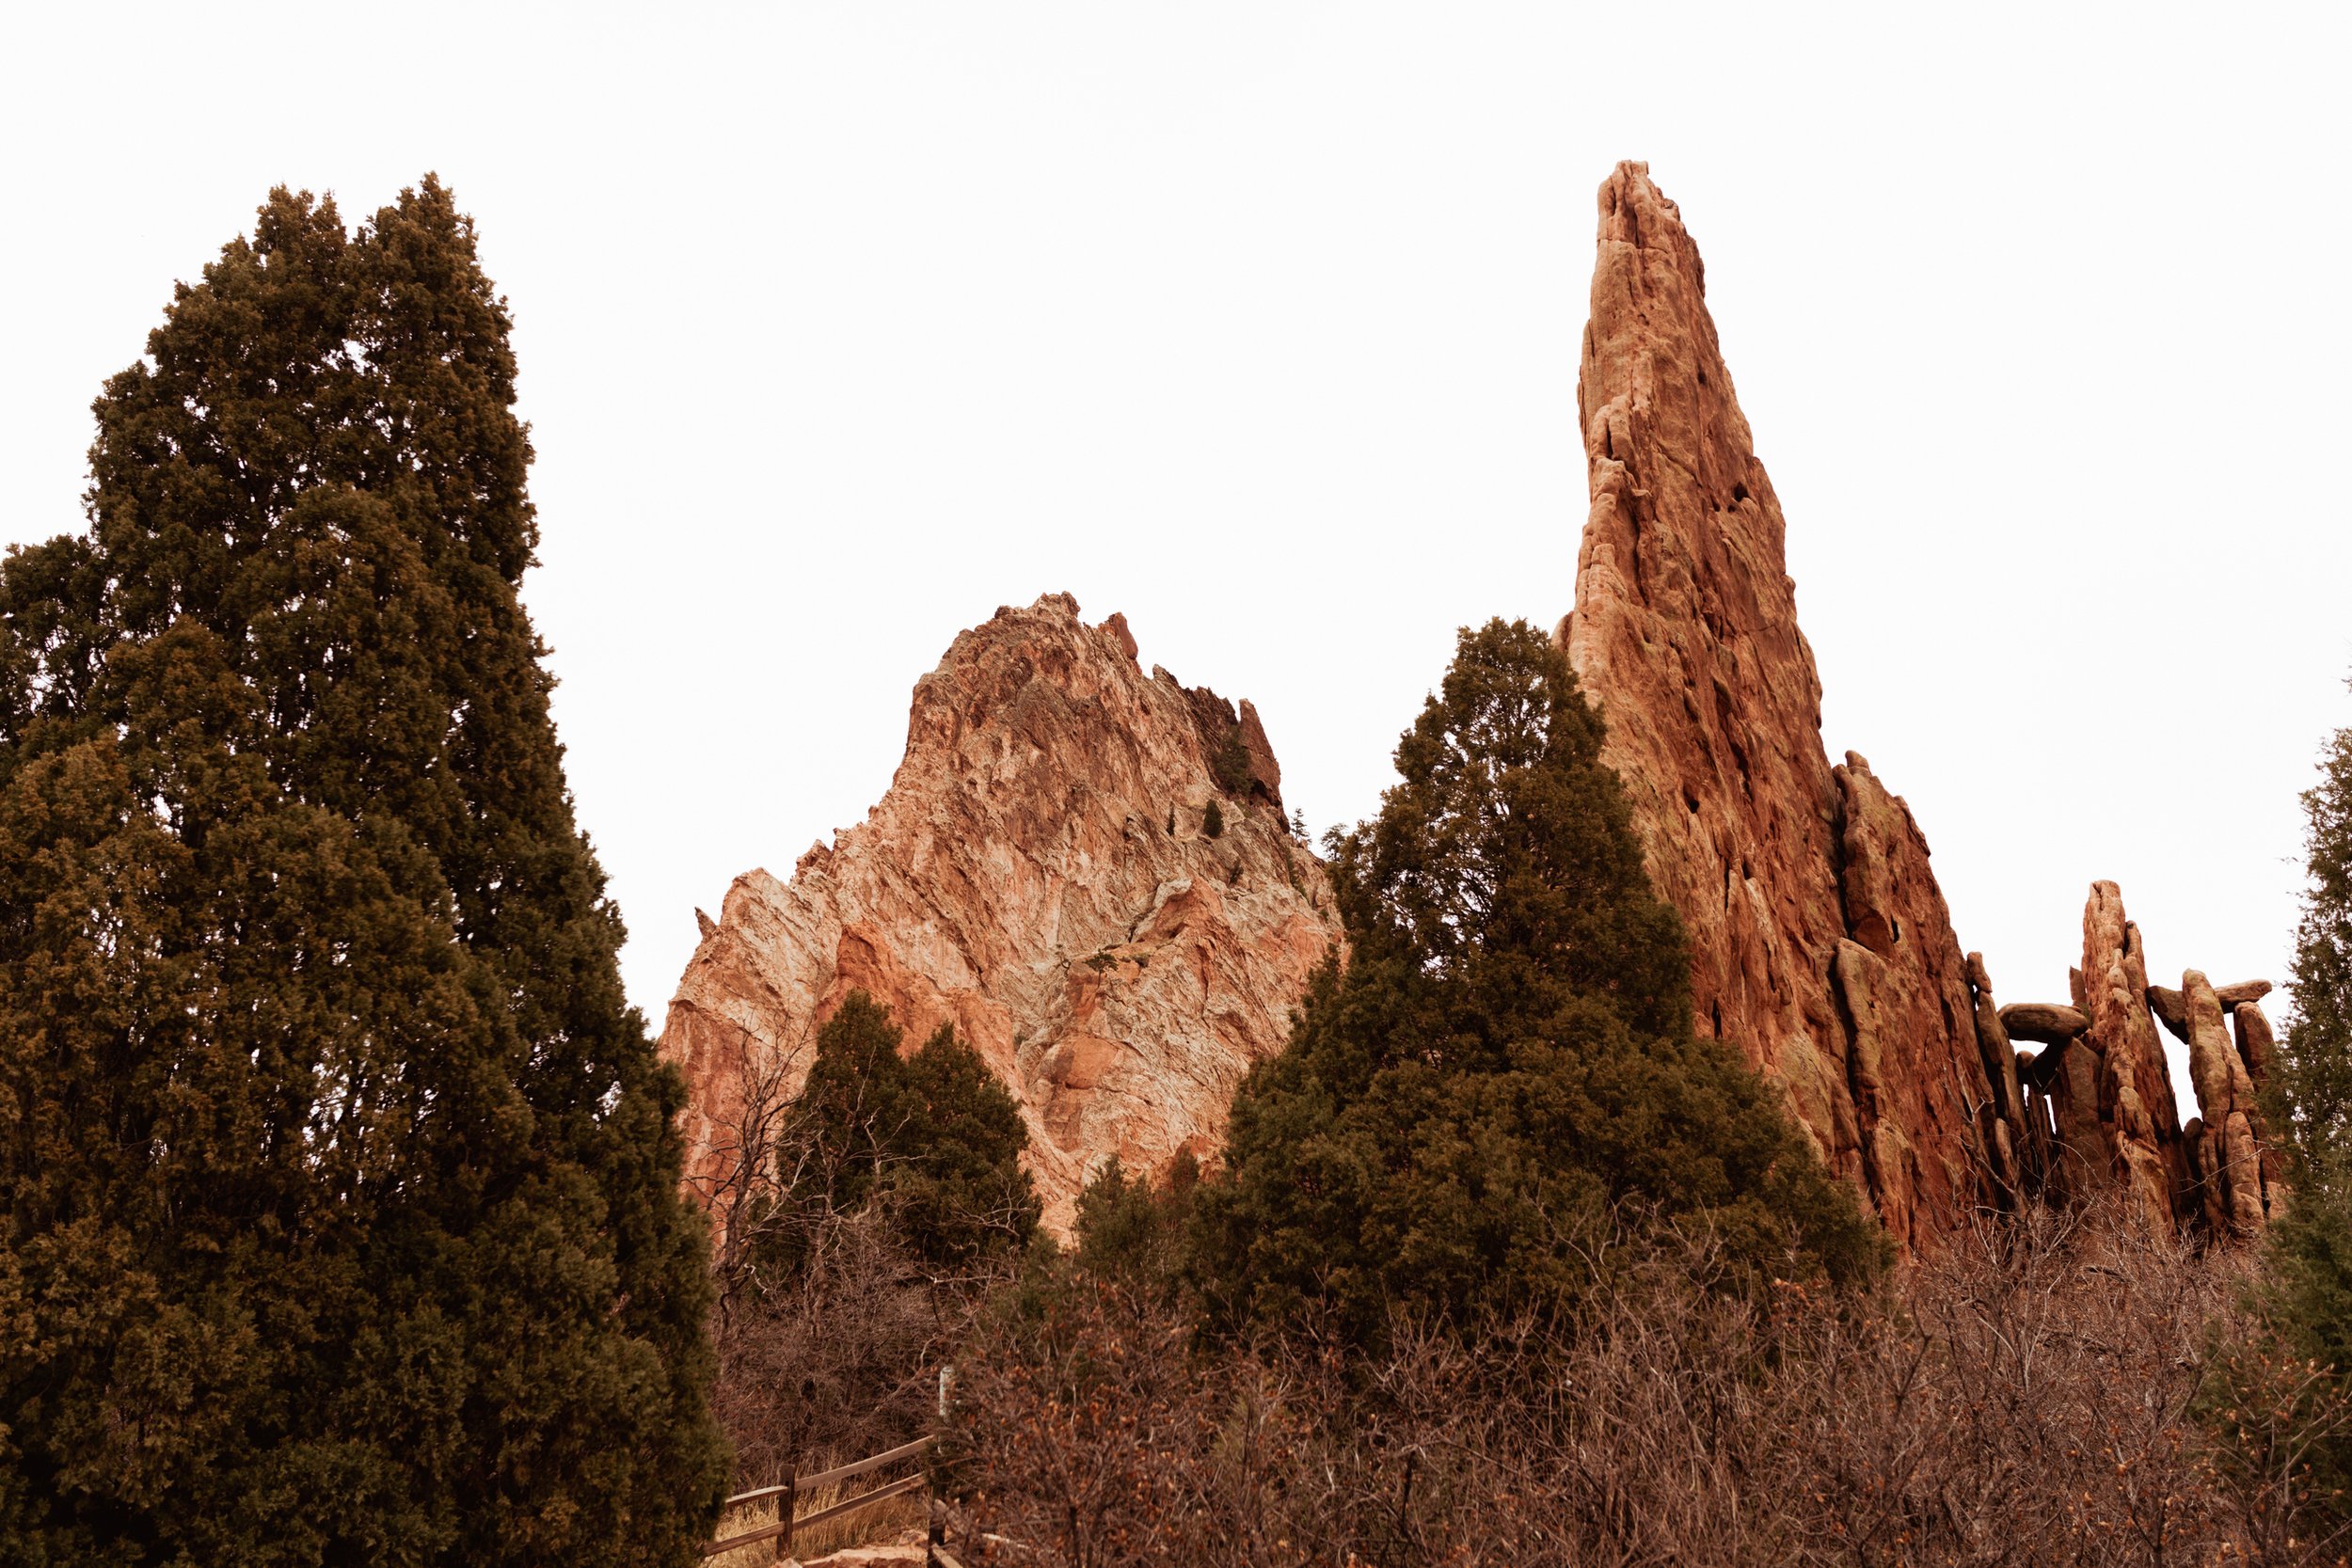 Vertical Rocks Pointing towards the Sky at Garden of the Gods | Scenic landscape images of red rock formations from Garden of the Gods | Colorado Springs |  Elopement Photographer Kept Record